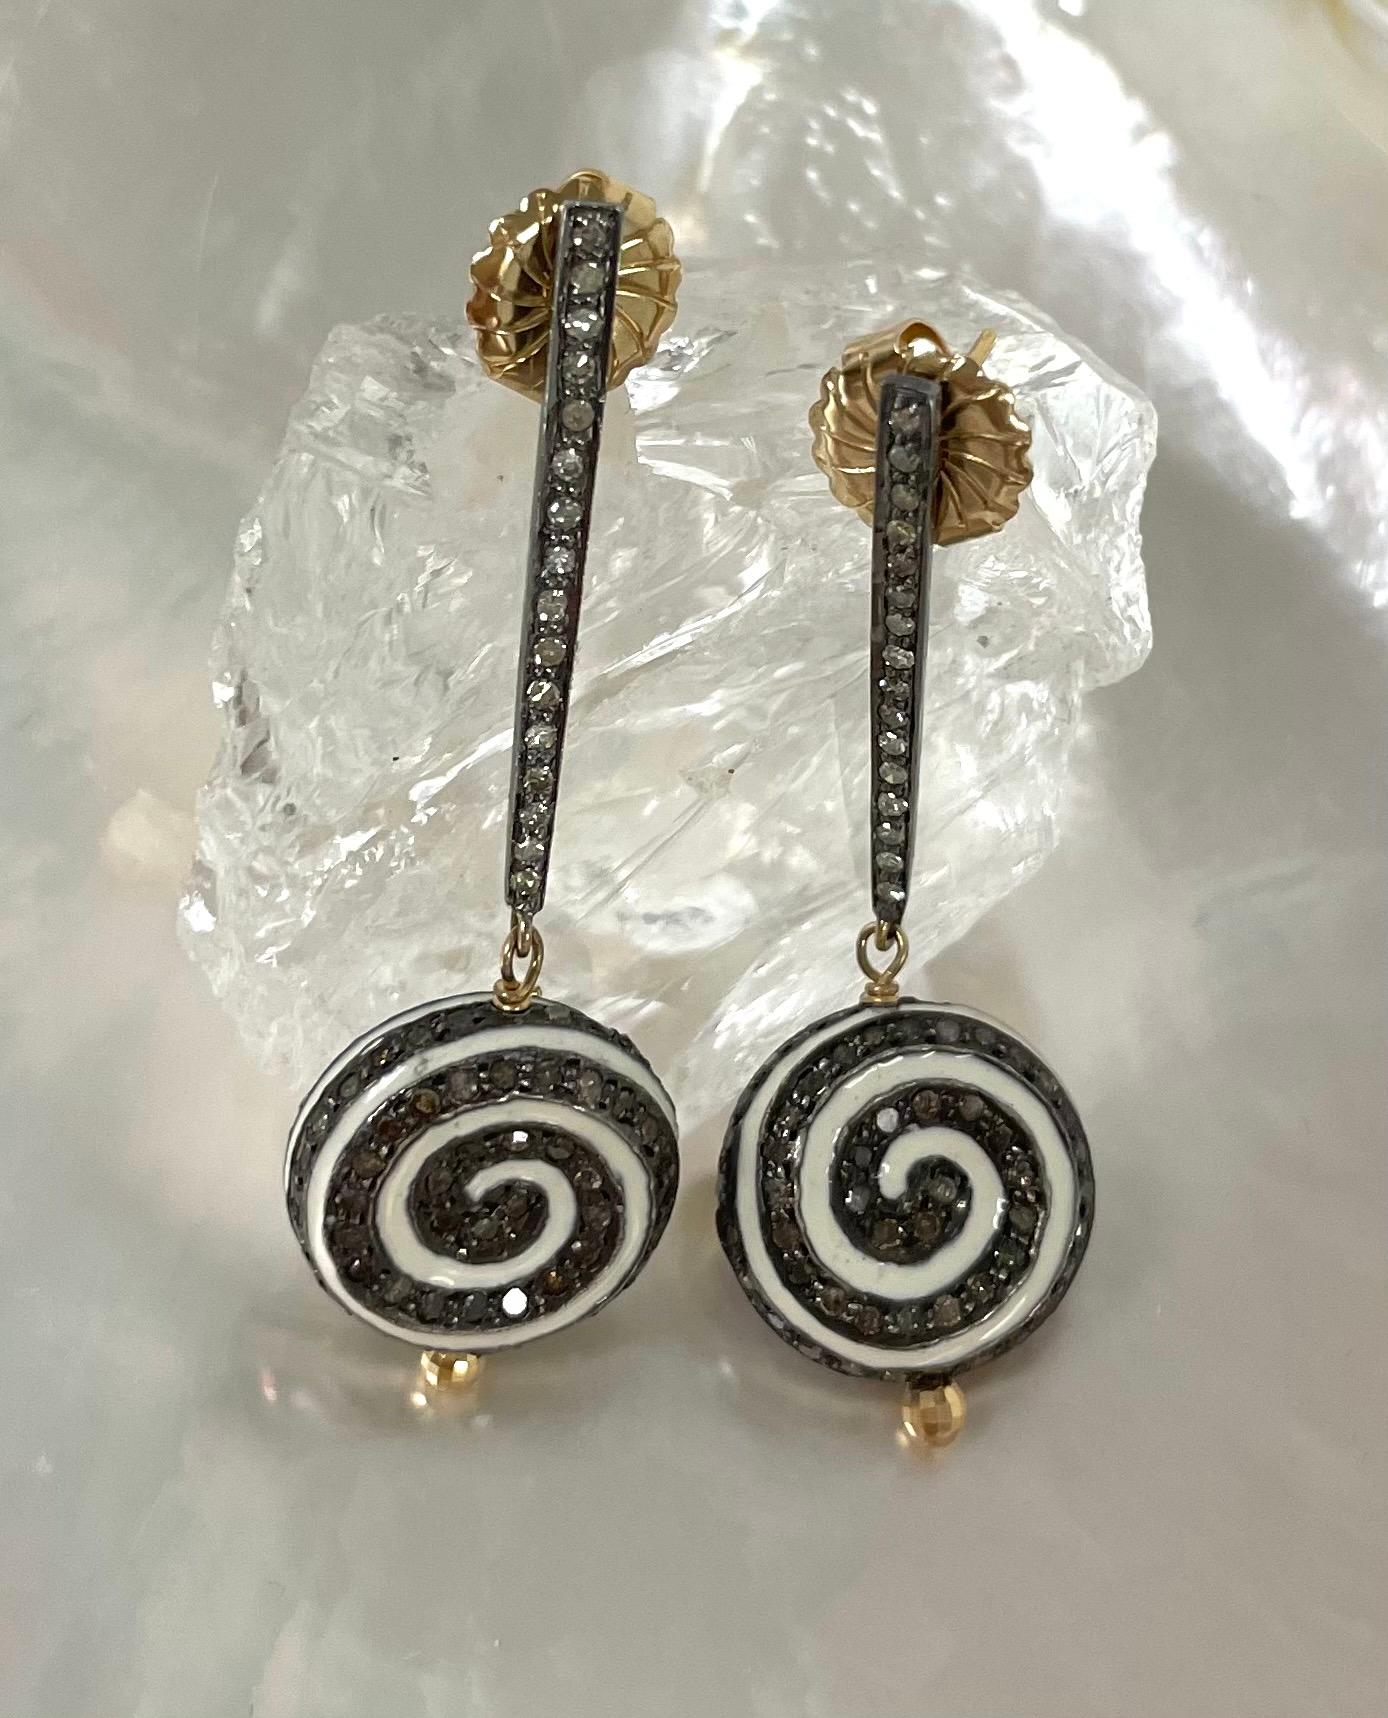 Enamel and Pave Diamond Pinwheel Design Earrings In New Condition For Sale In Laguna Beach, CA